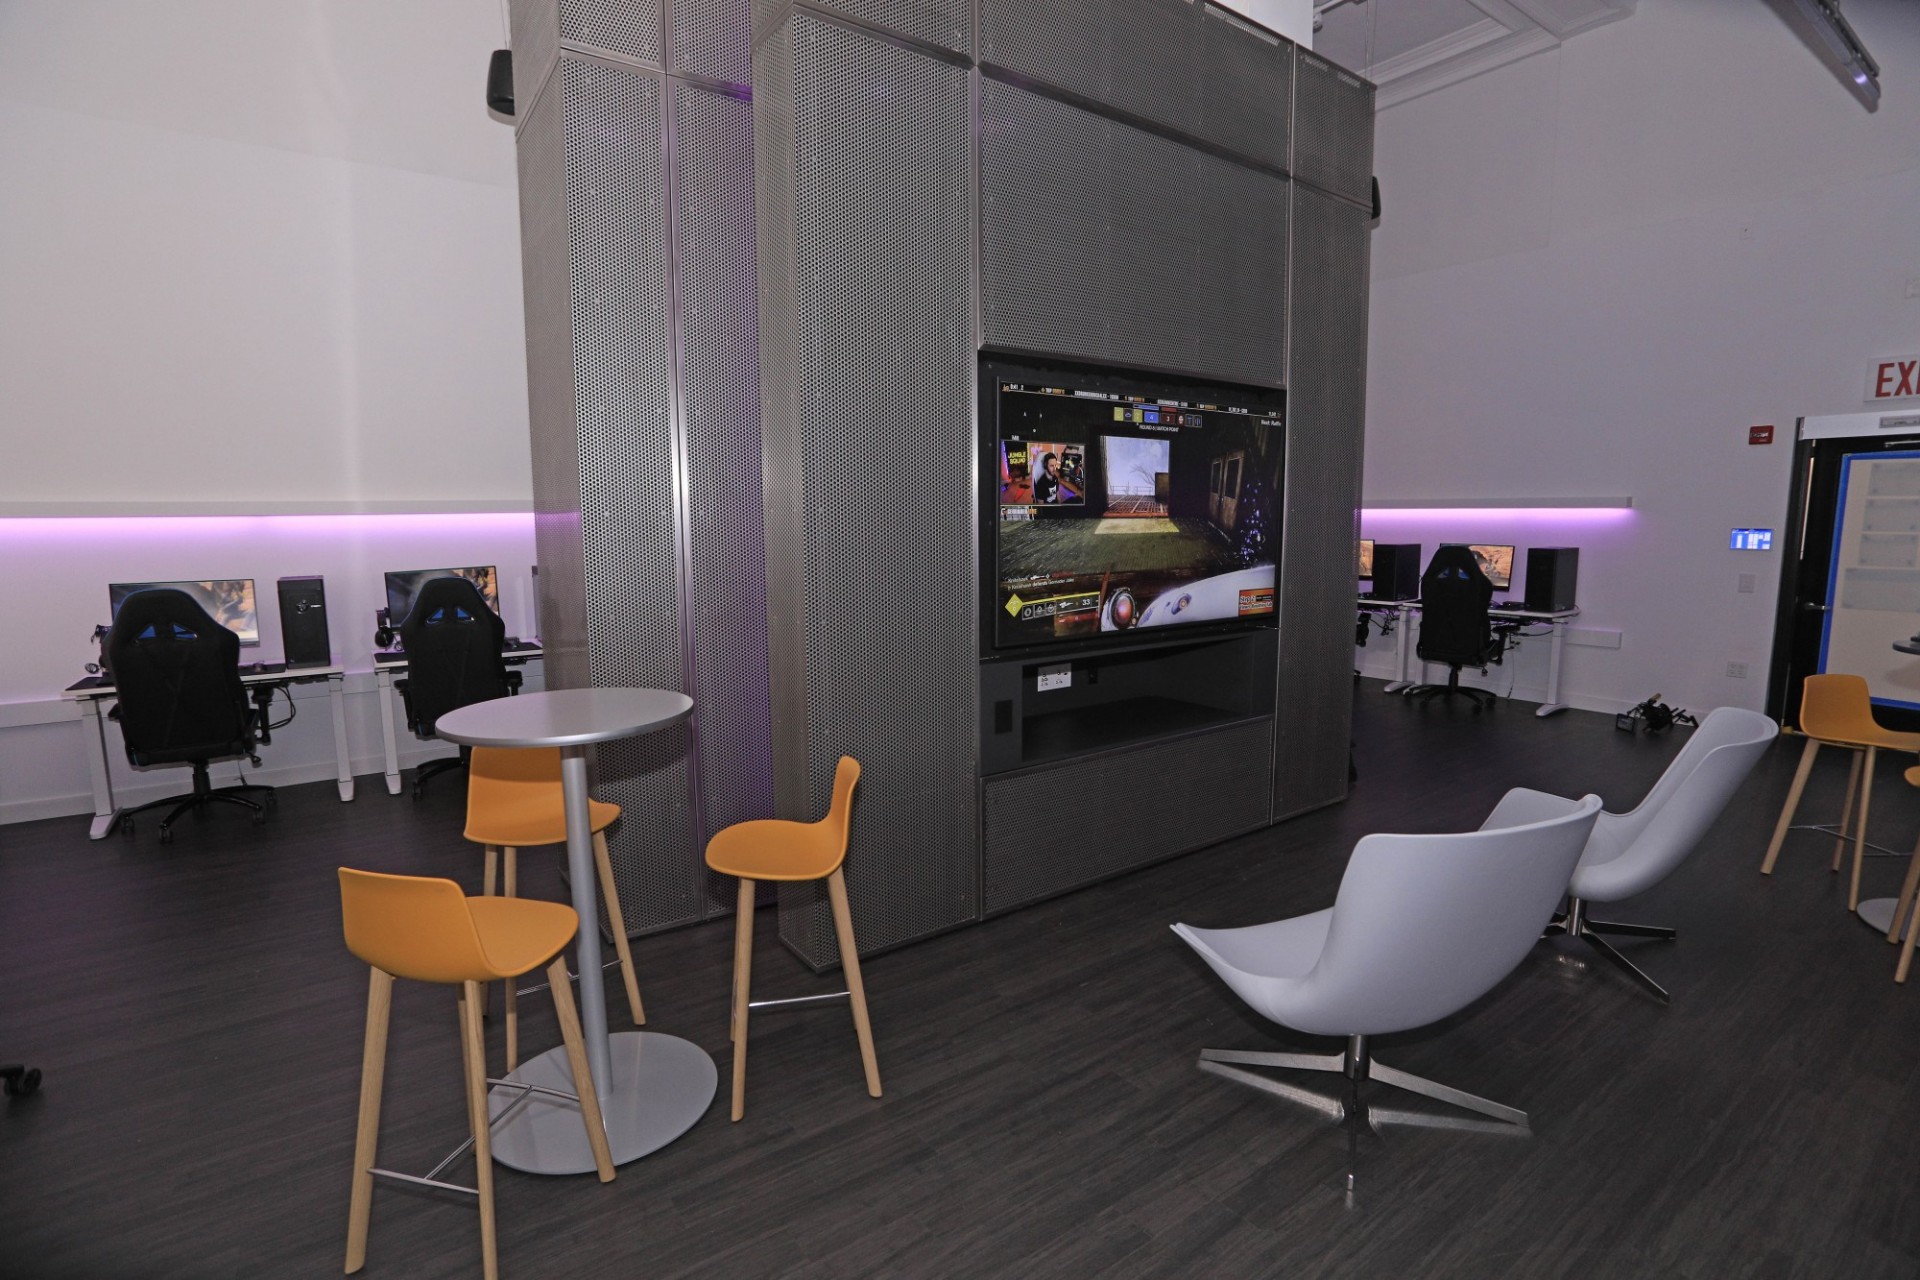 The room features individual and group gaming stations